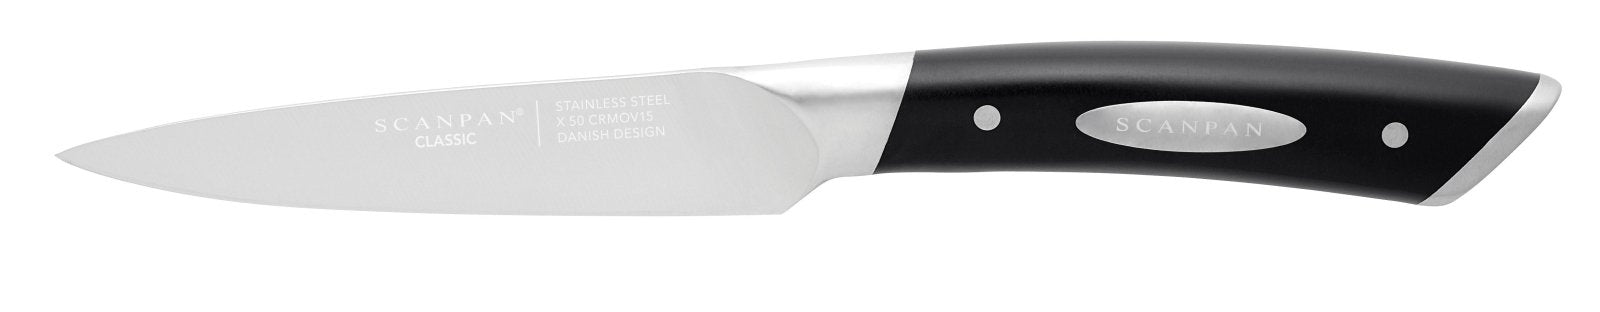 Scanpan Classic 11.5cm Utility Knife - SP92151200 - The Cotswold Knife Company